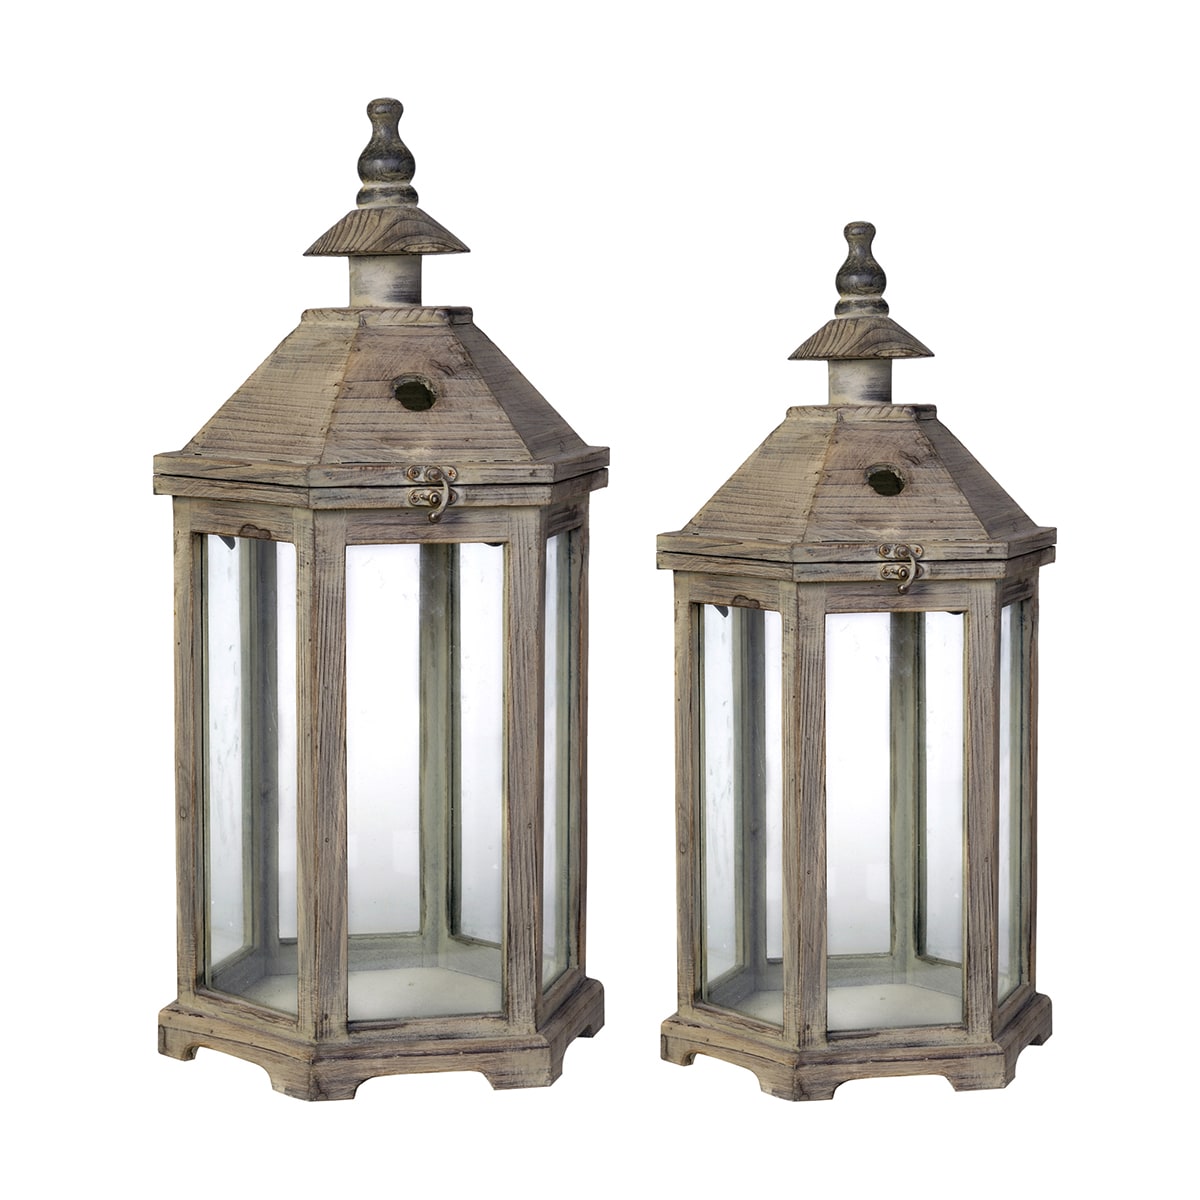 Red Hill General Store: 3/16 inch Round Lamp and Lantern Wick